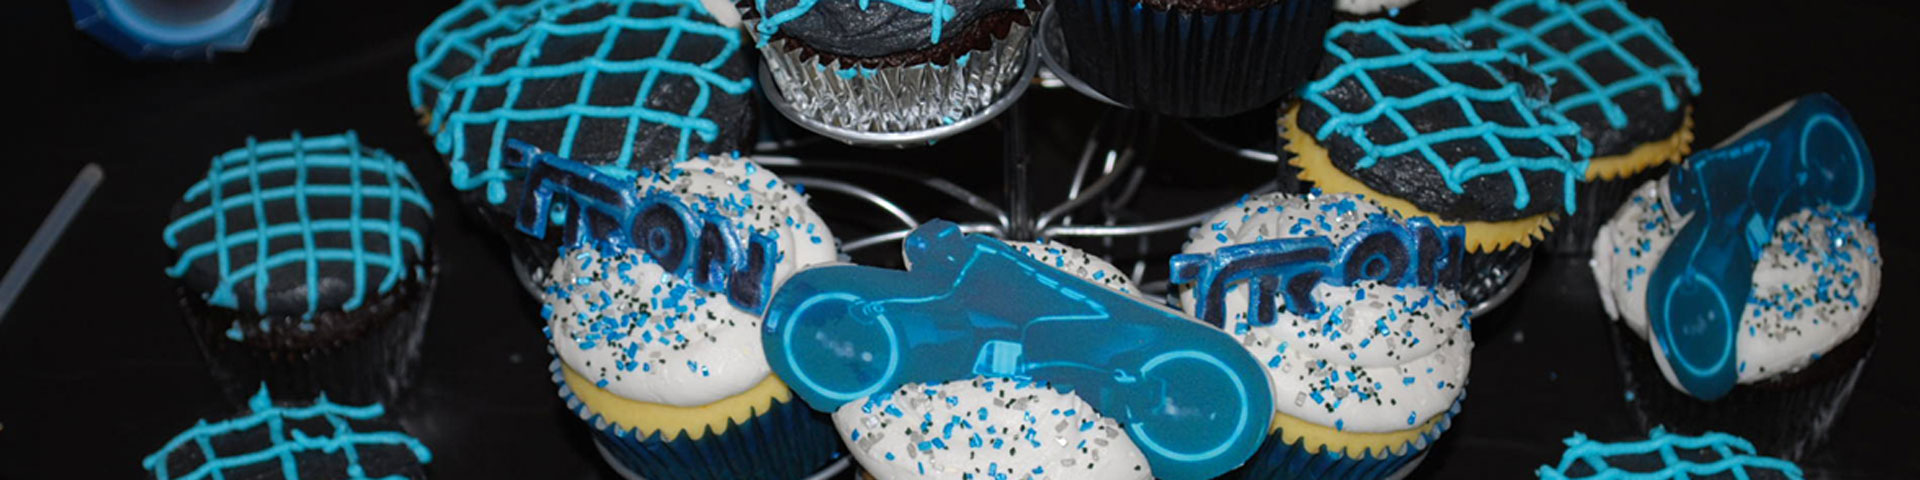 A pyramid of chocolate and vanilla cupcakes decorated with blue grids. Some of the cupcakes have lightcycles and other items from Tron on them.